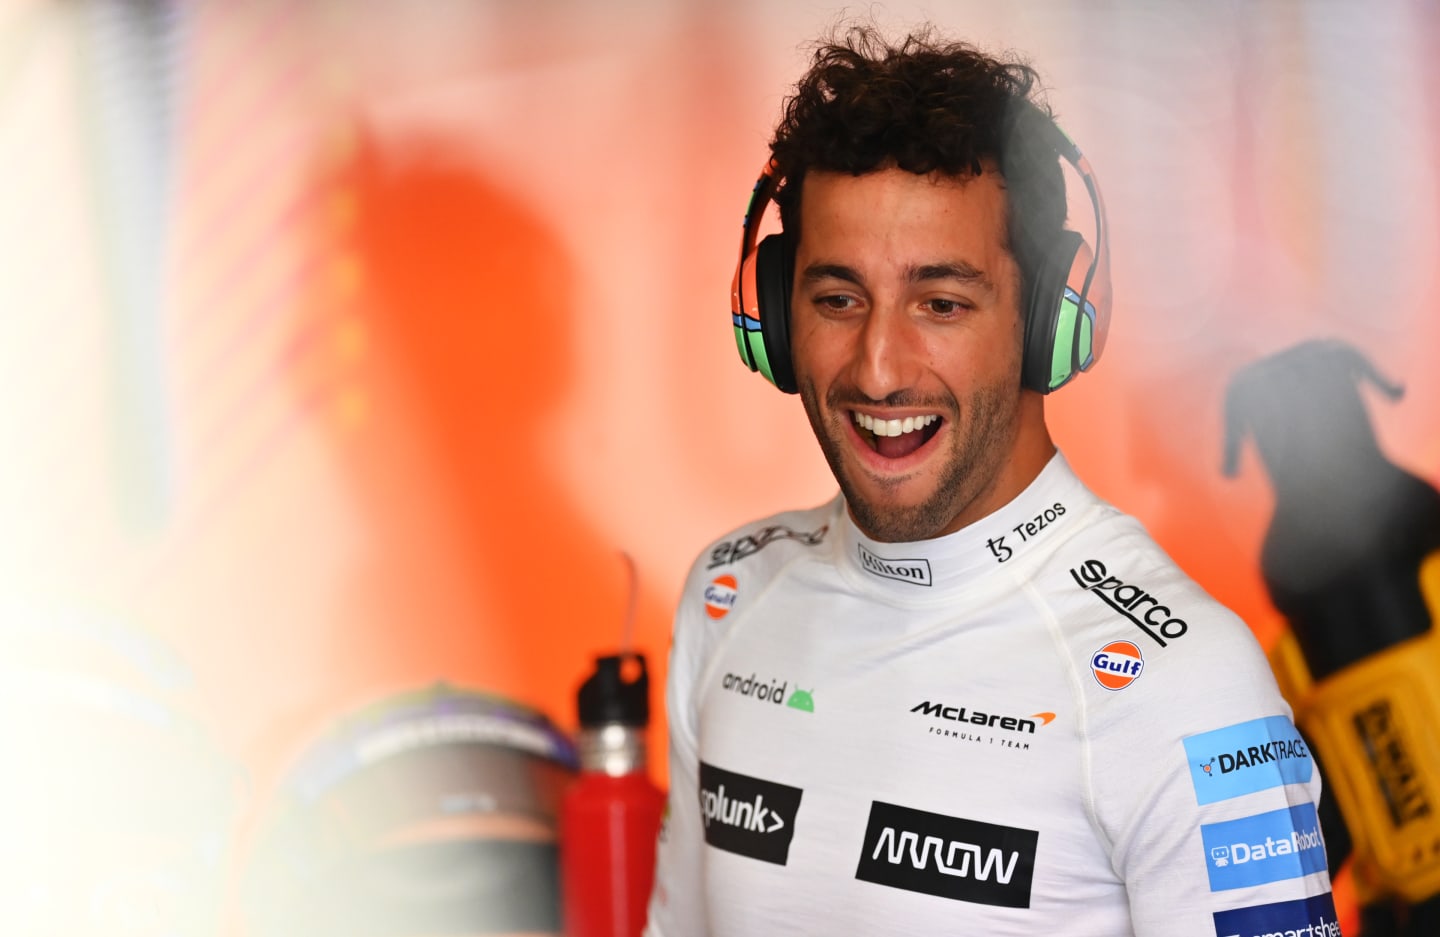 MONTREAL, QUEBEC - JUNE 17: Daniel Ricciardo of Australia and McLaren looks on in the garage during practice ahead of the F1 Grand Prix of Canada at Circuit Gilles Villeneuve on June 17, 2022 in Montreal, Quebec. (Photo by Dan Mullan/Getty Images)